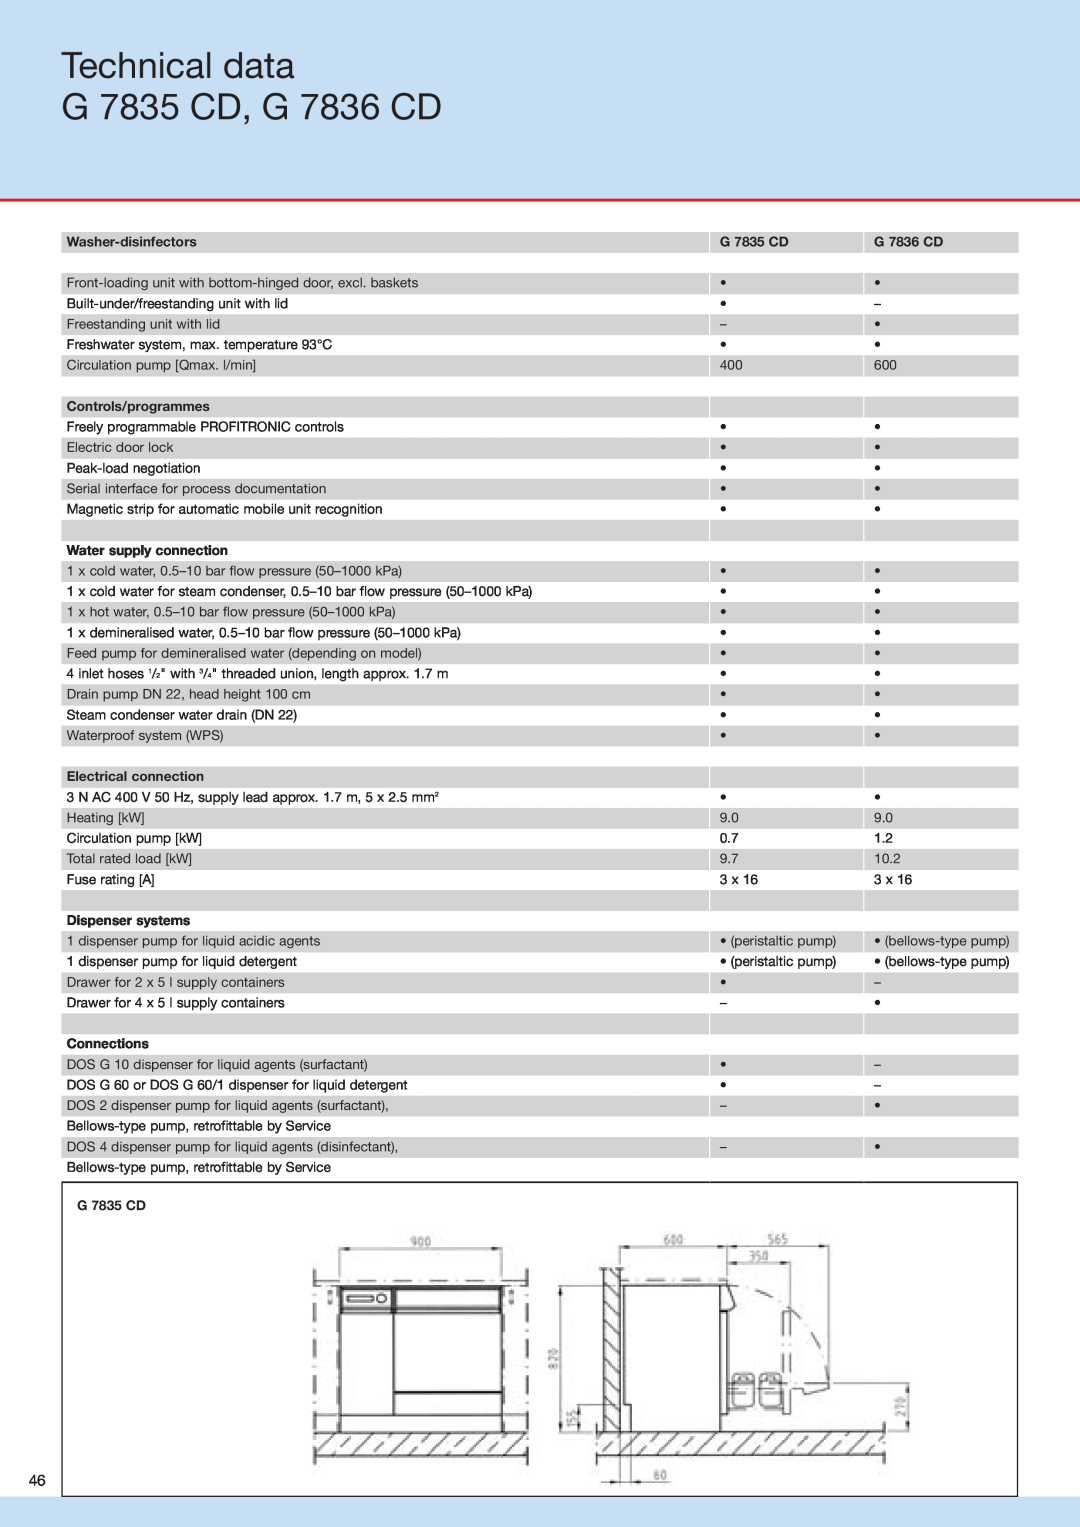 Miele G 7883 manual Technical data G 7835 CD, G 7836 CD, Washer-disinfectors, Controls/programmes, Water supply connection 